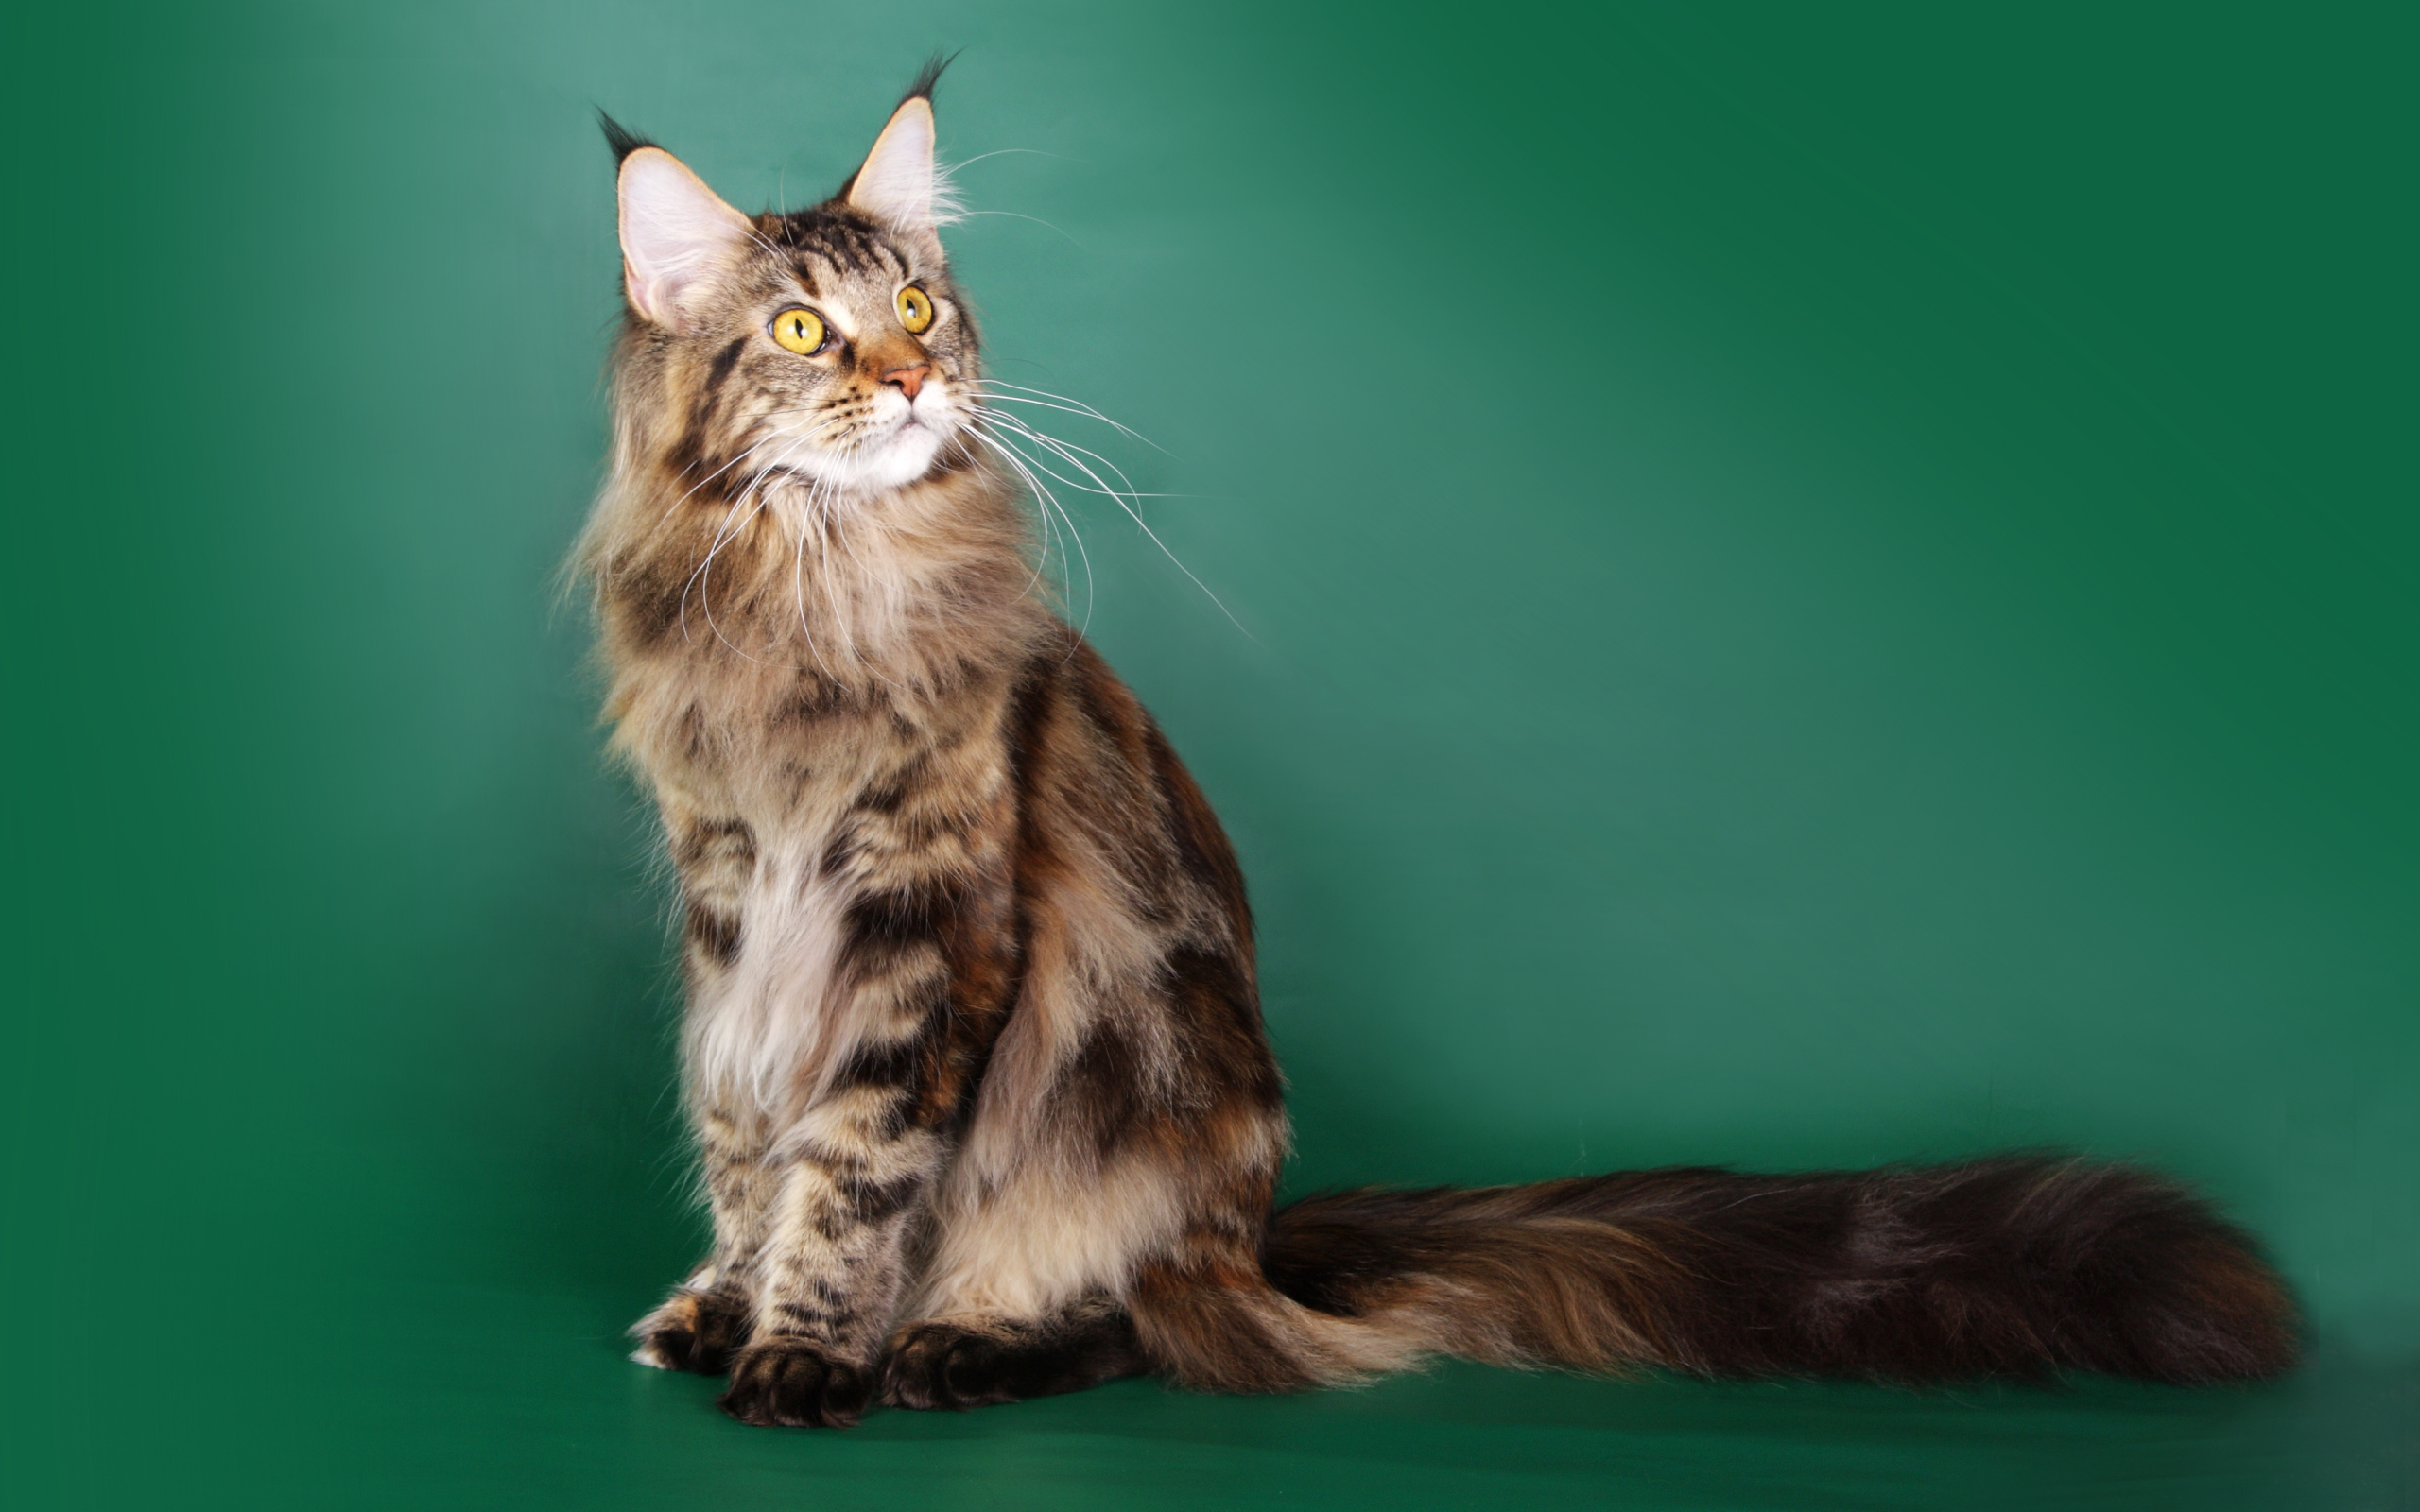 Beautiful Maine Coon cat on a green background